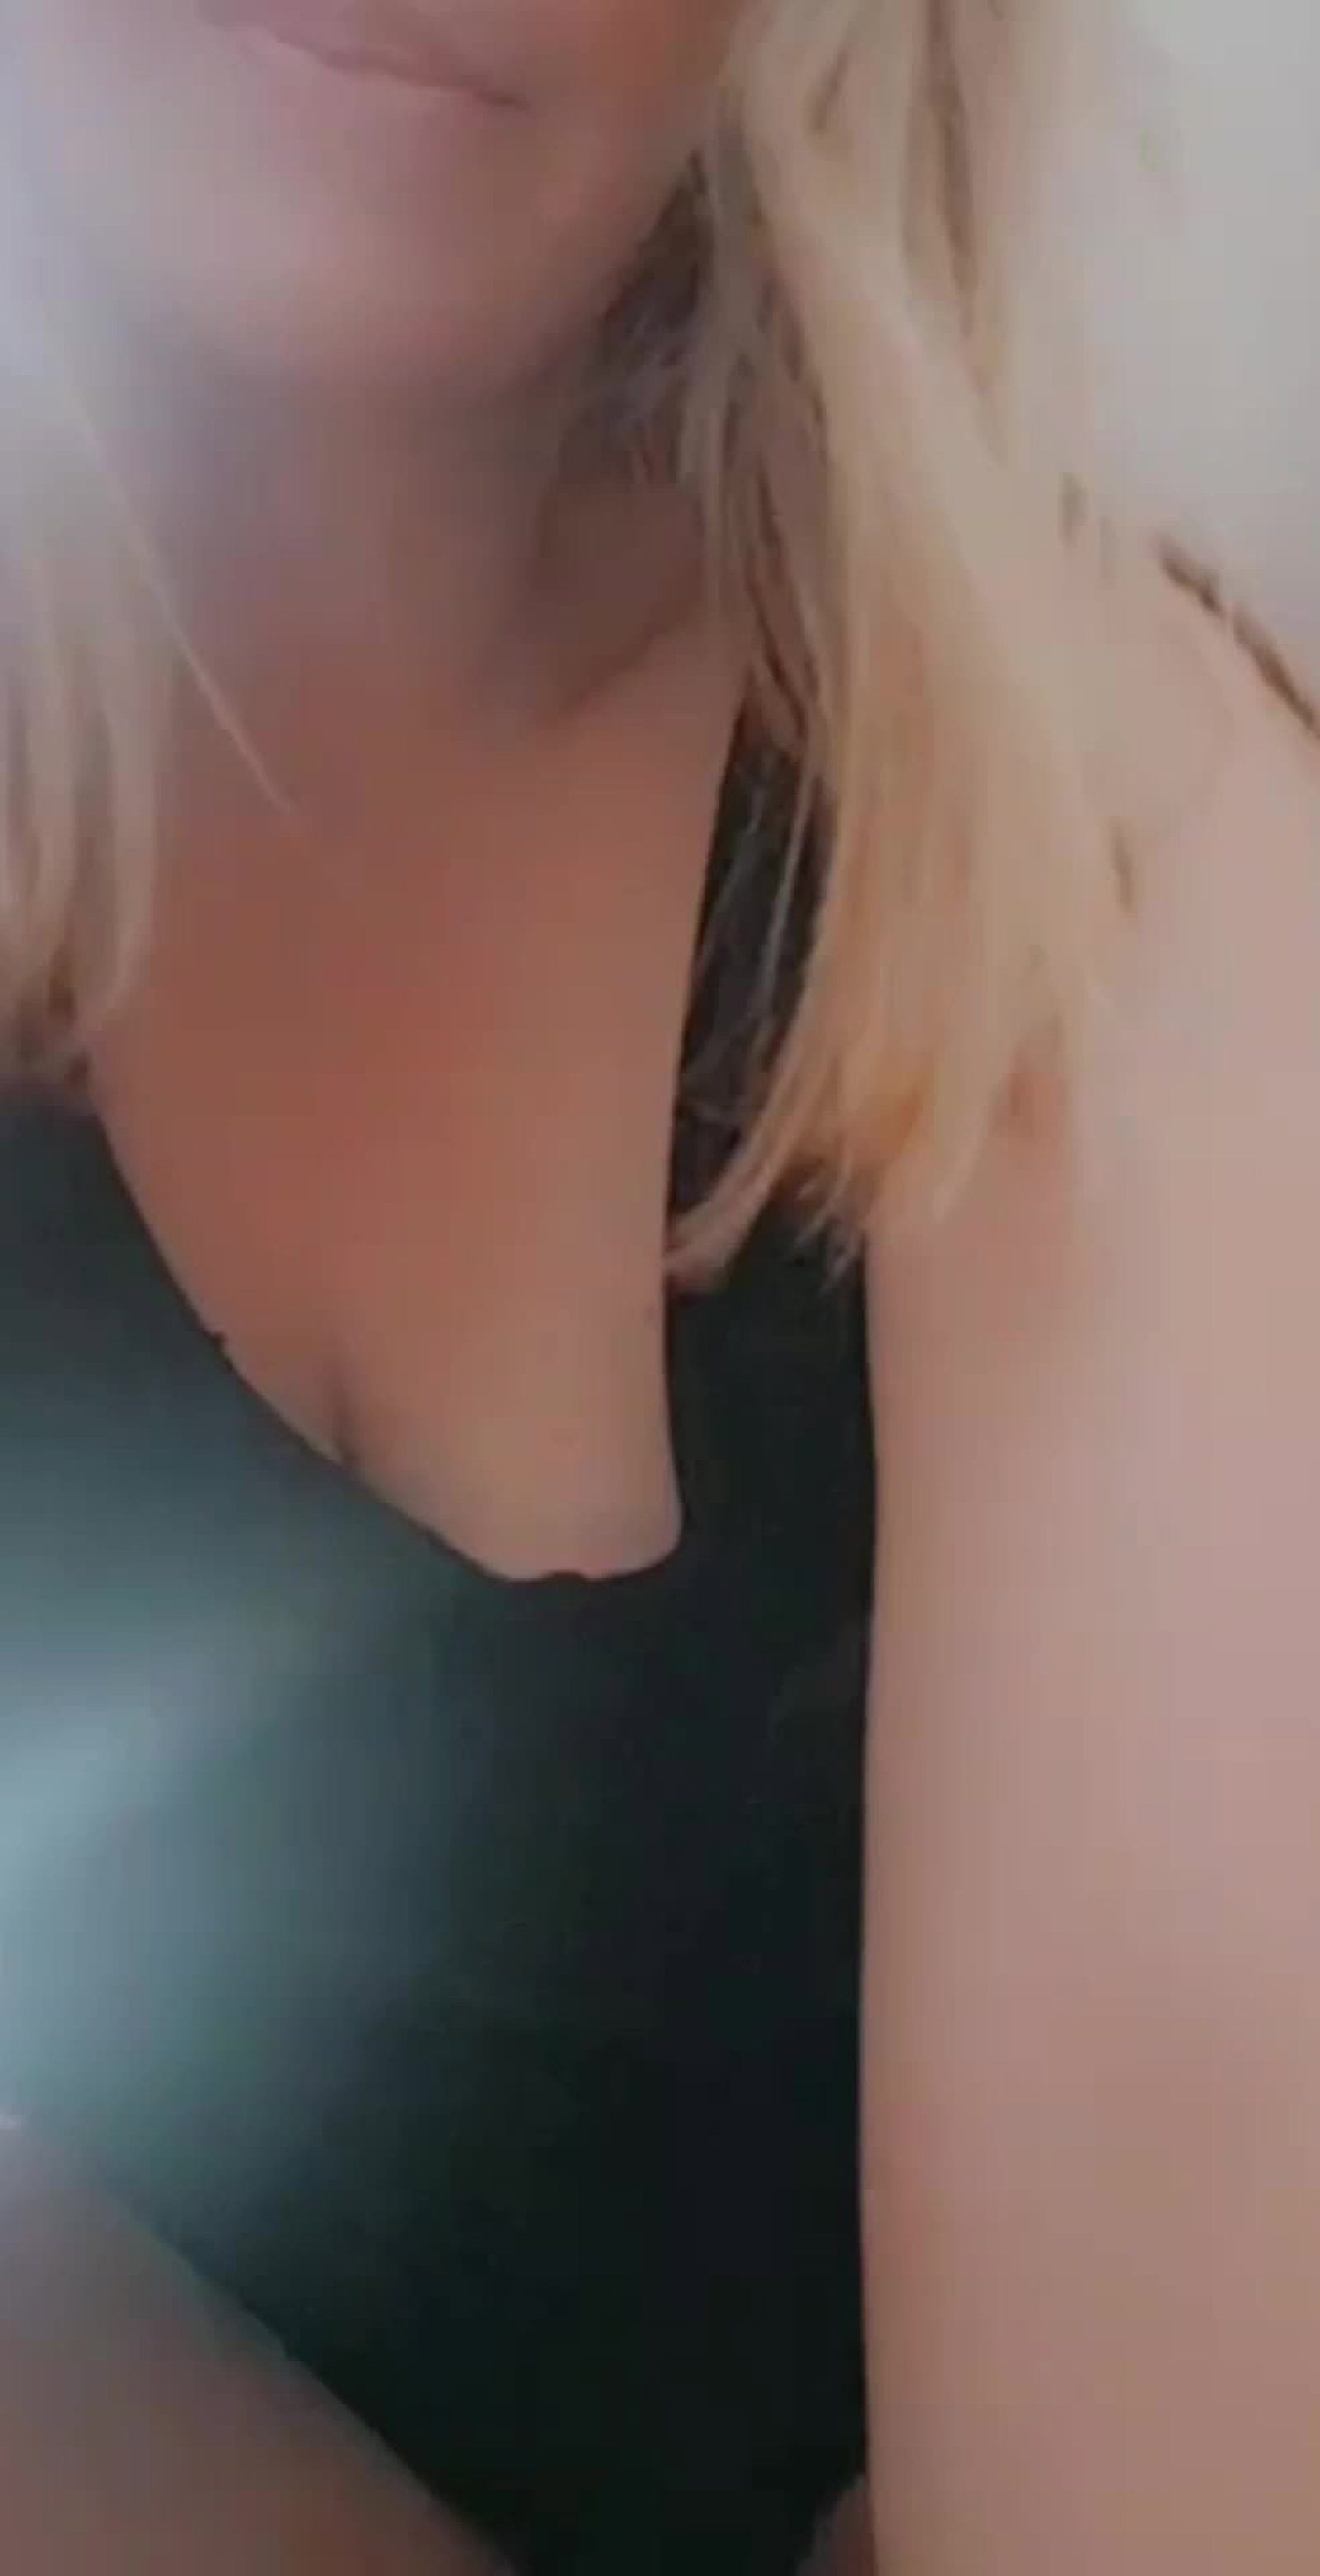 Video by Purplexity with the username @Purplexity, who is a star user,  July 17, 2022 at 3:32 AM. The post is about the topic MILF and the text says 'Happy Saturday #milf #hotwife'